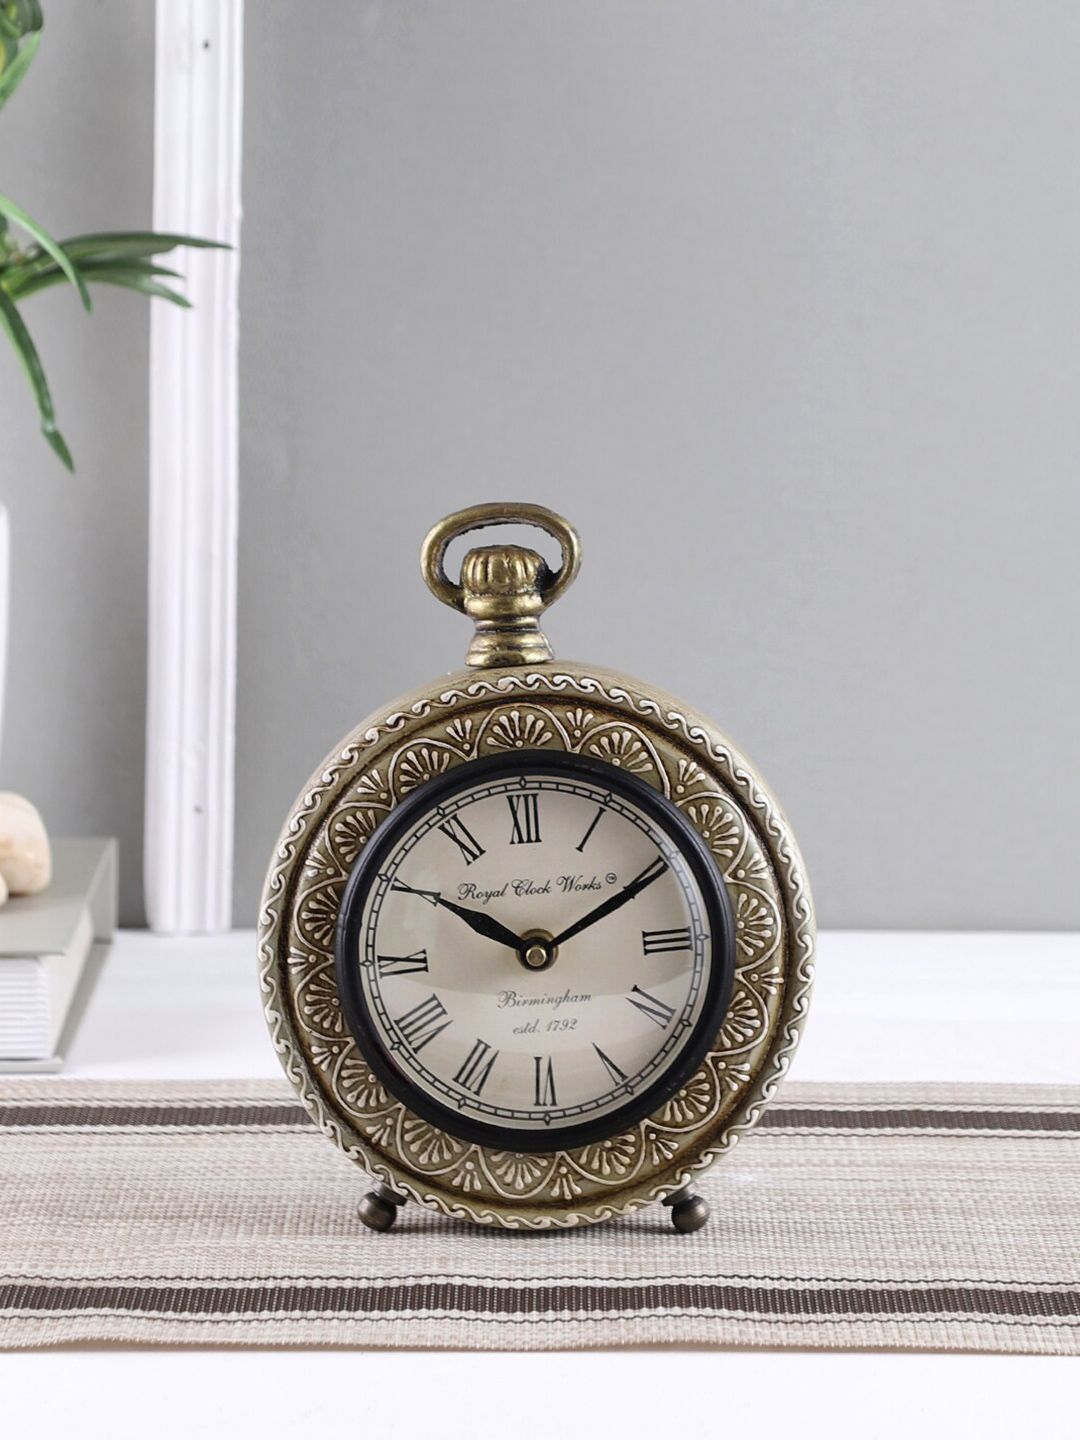 Aapno Rajasthan Grey & Black Textured Traditional Table Clock Price in India